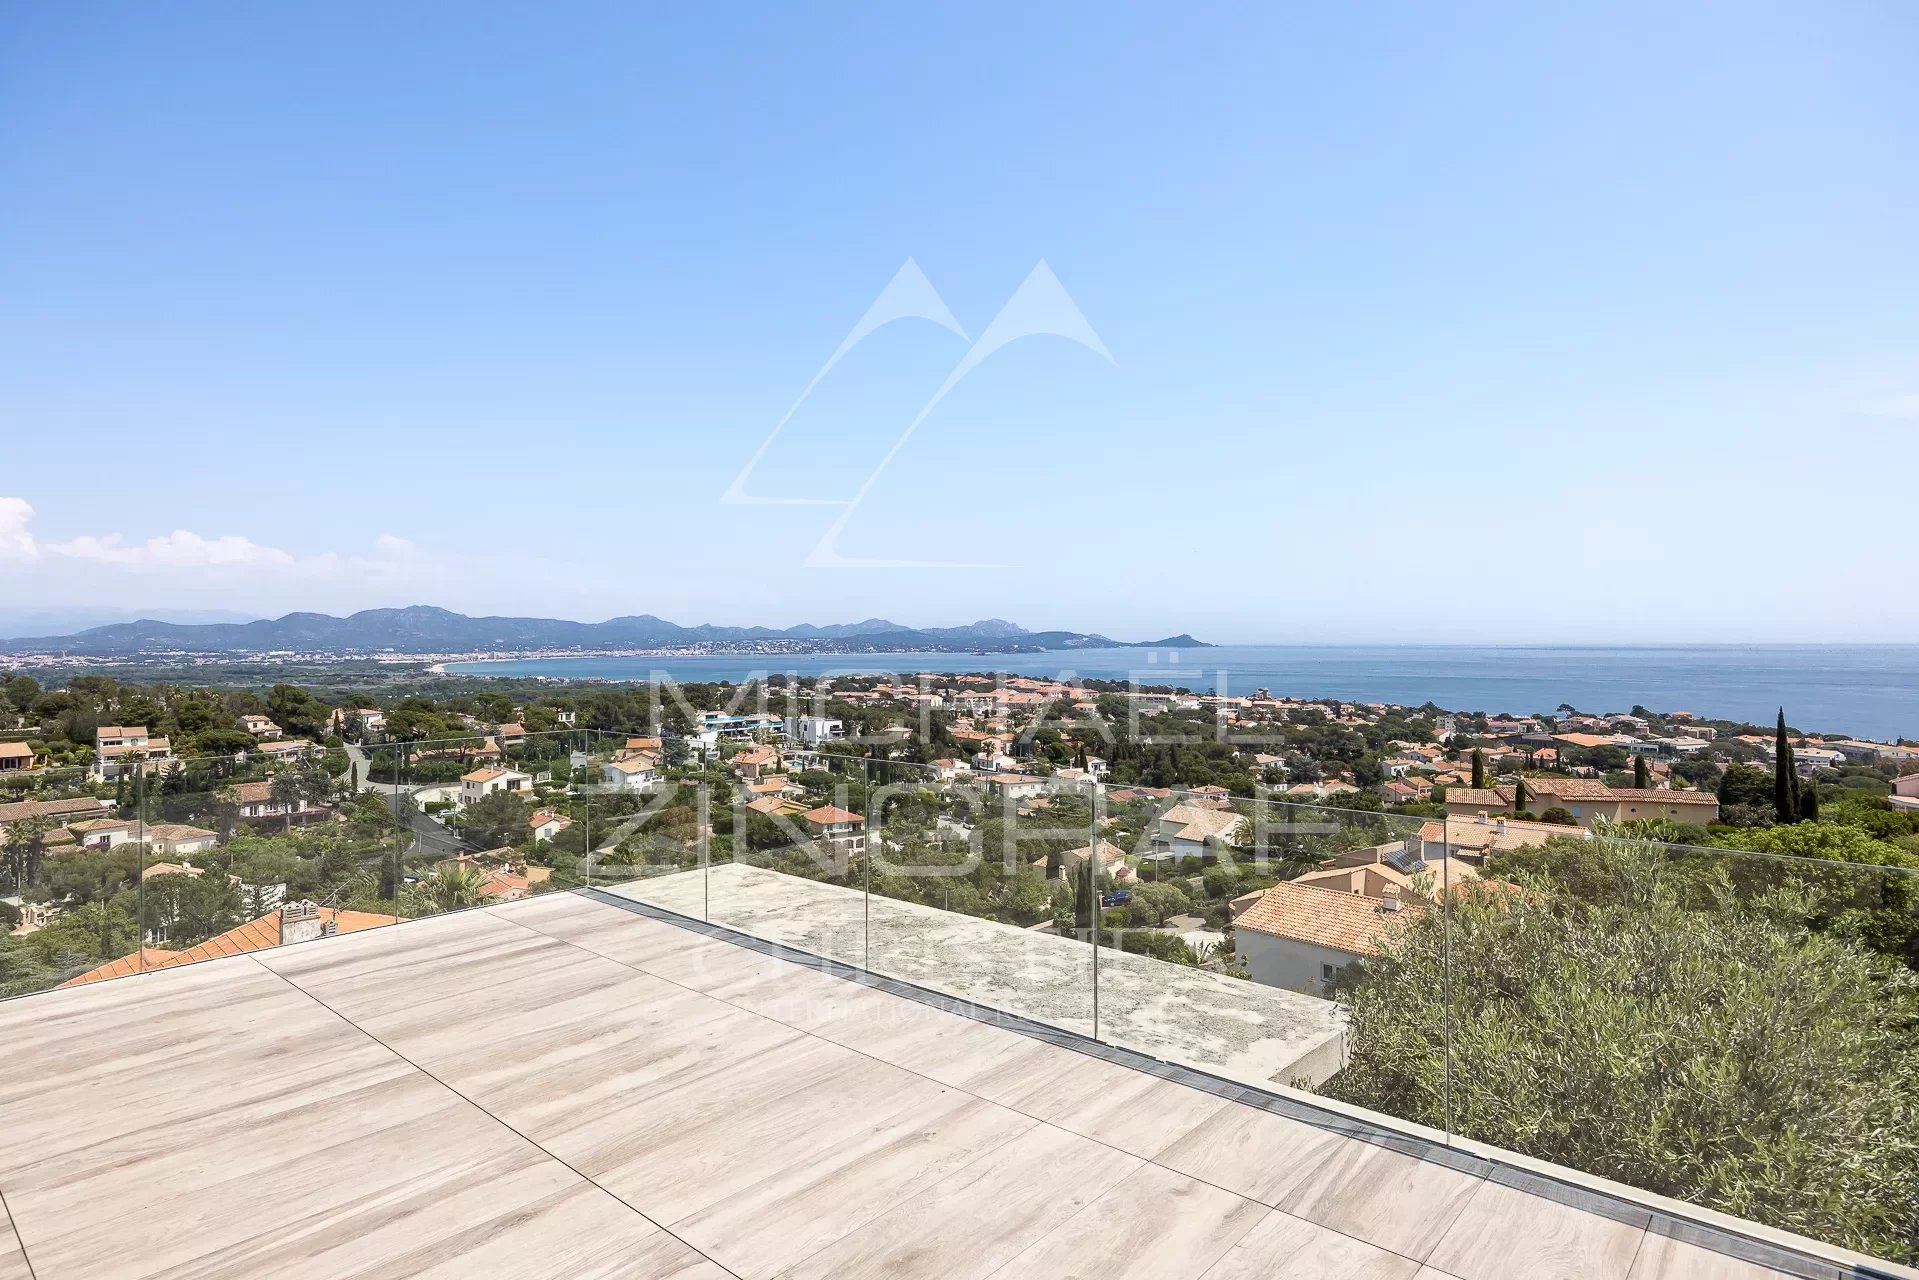 Villa with sea view between Cannes and Saint-Tropez